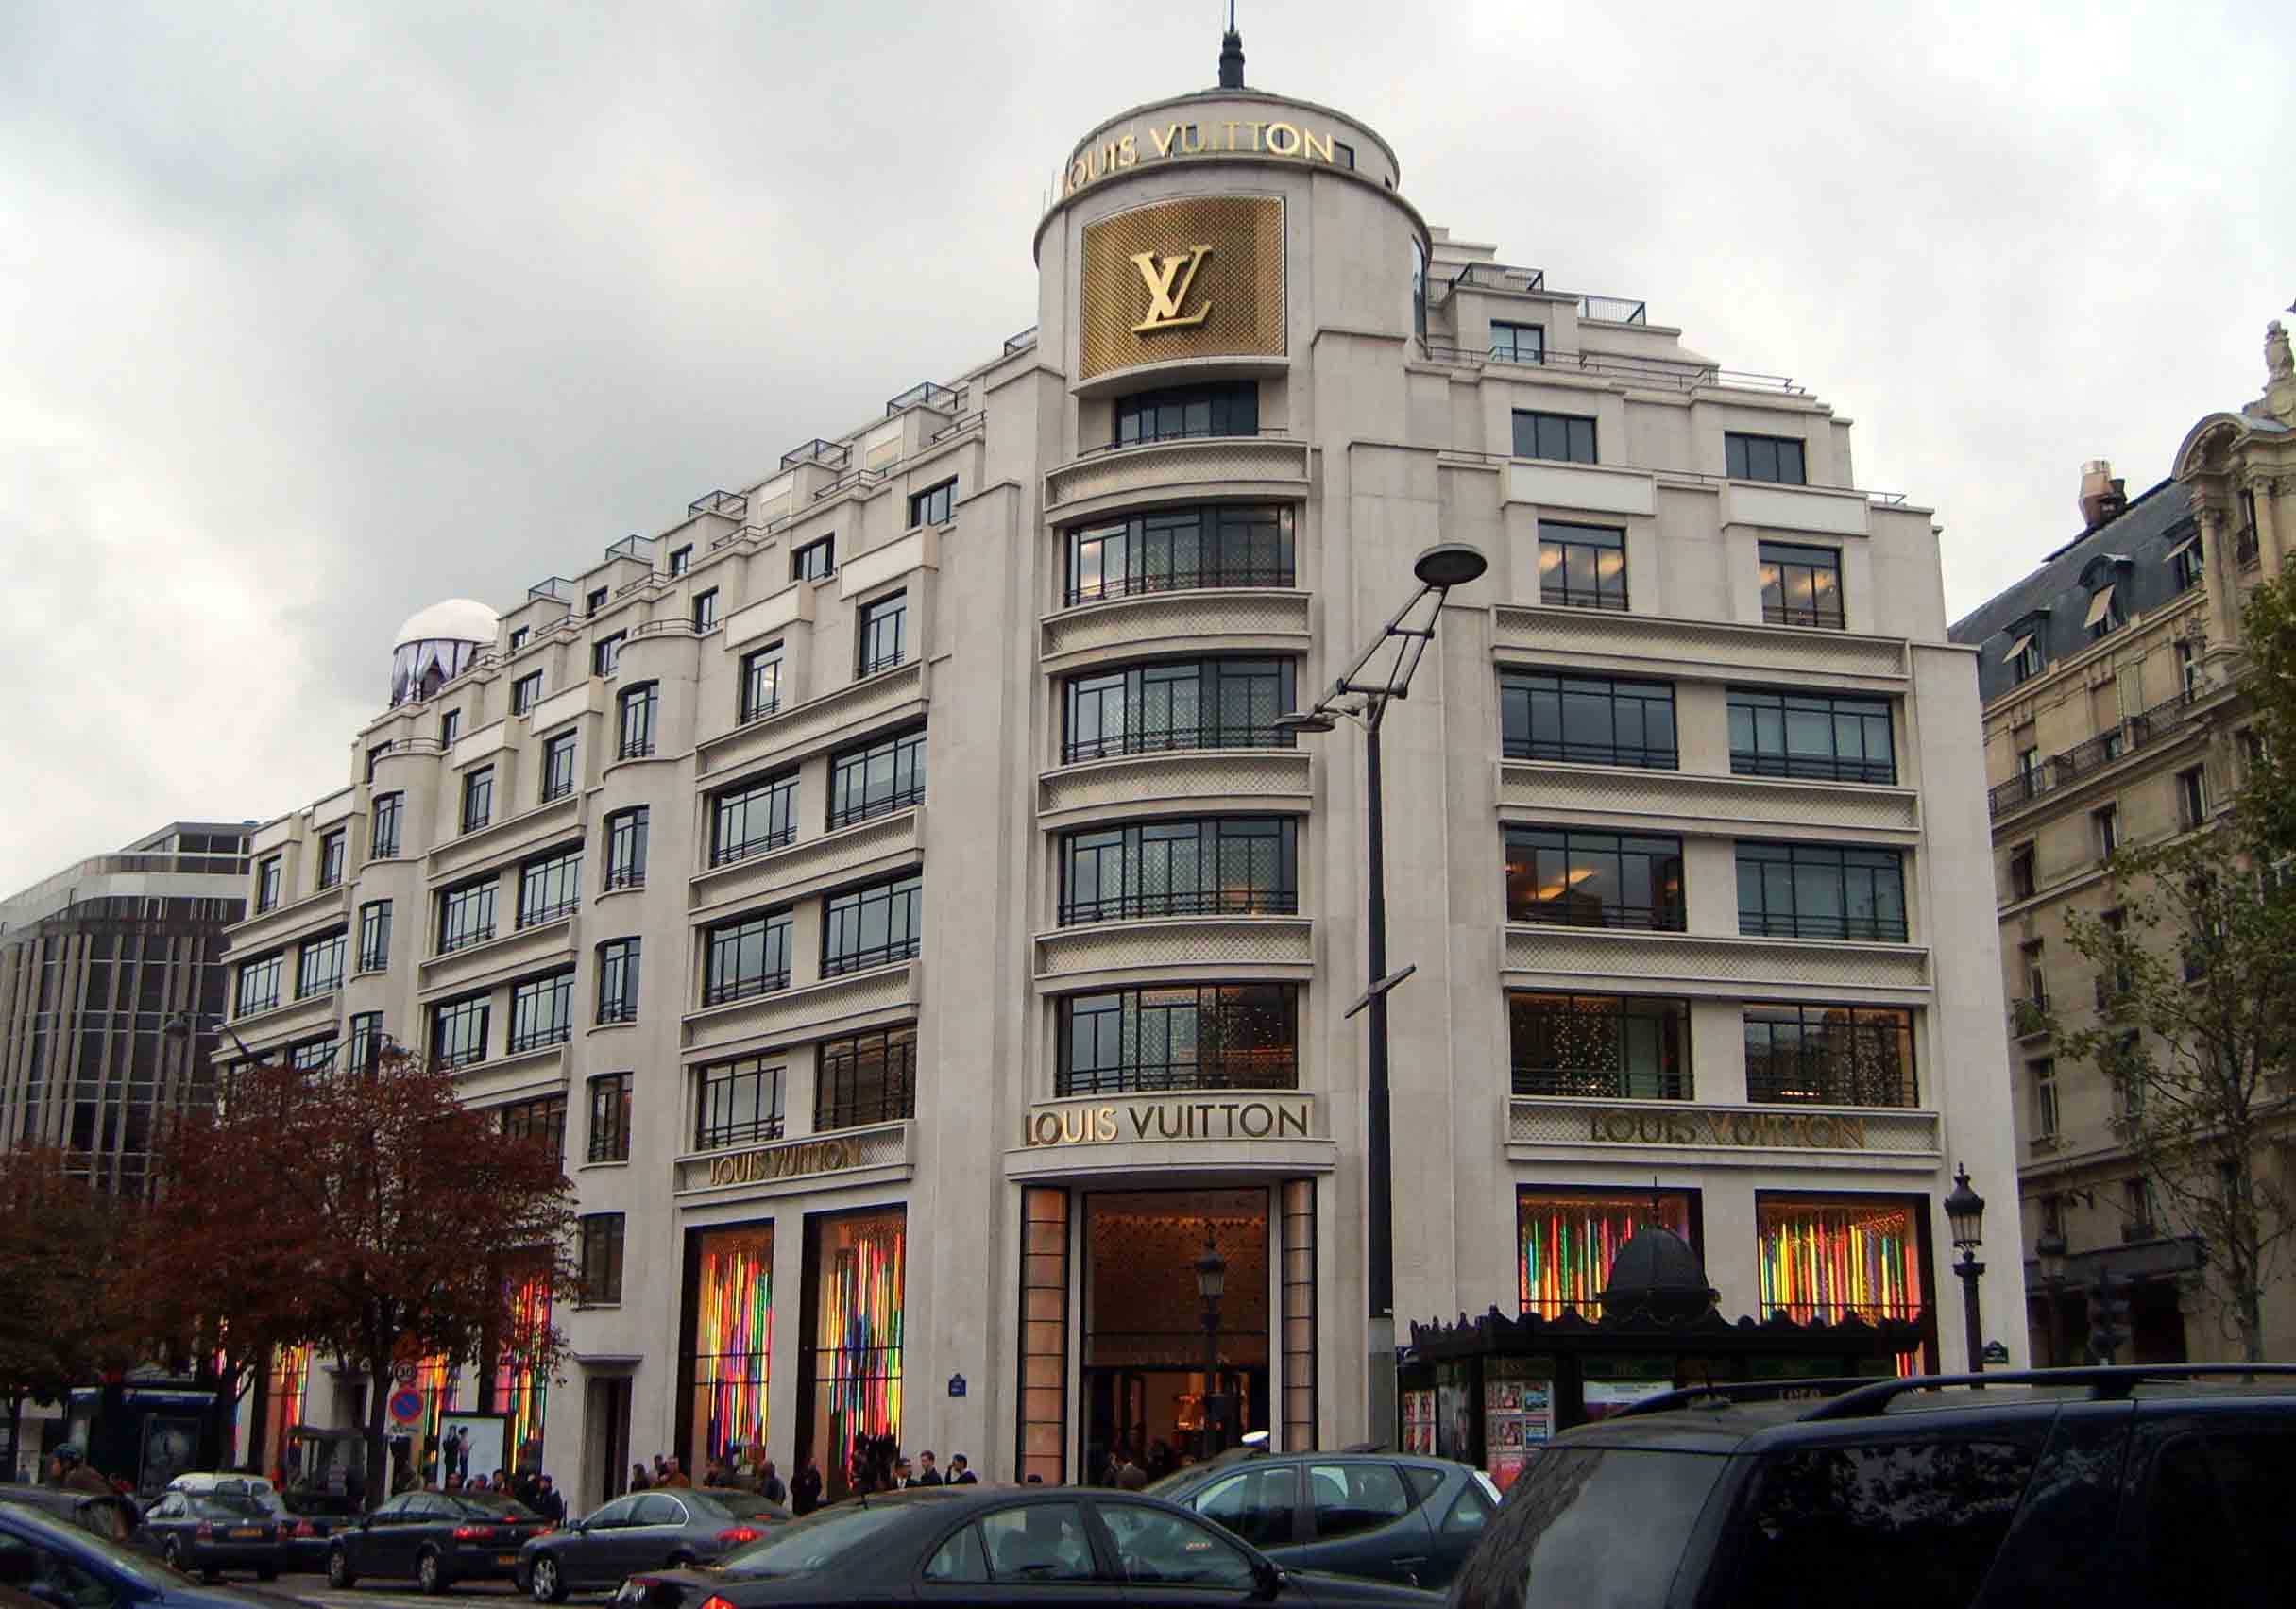 Louis-Vuitton-situated-on-the-famous-Champs-Elysées-Paris-Wikipedia